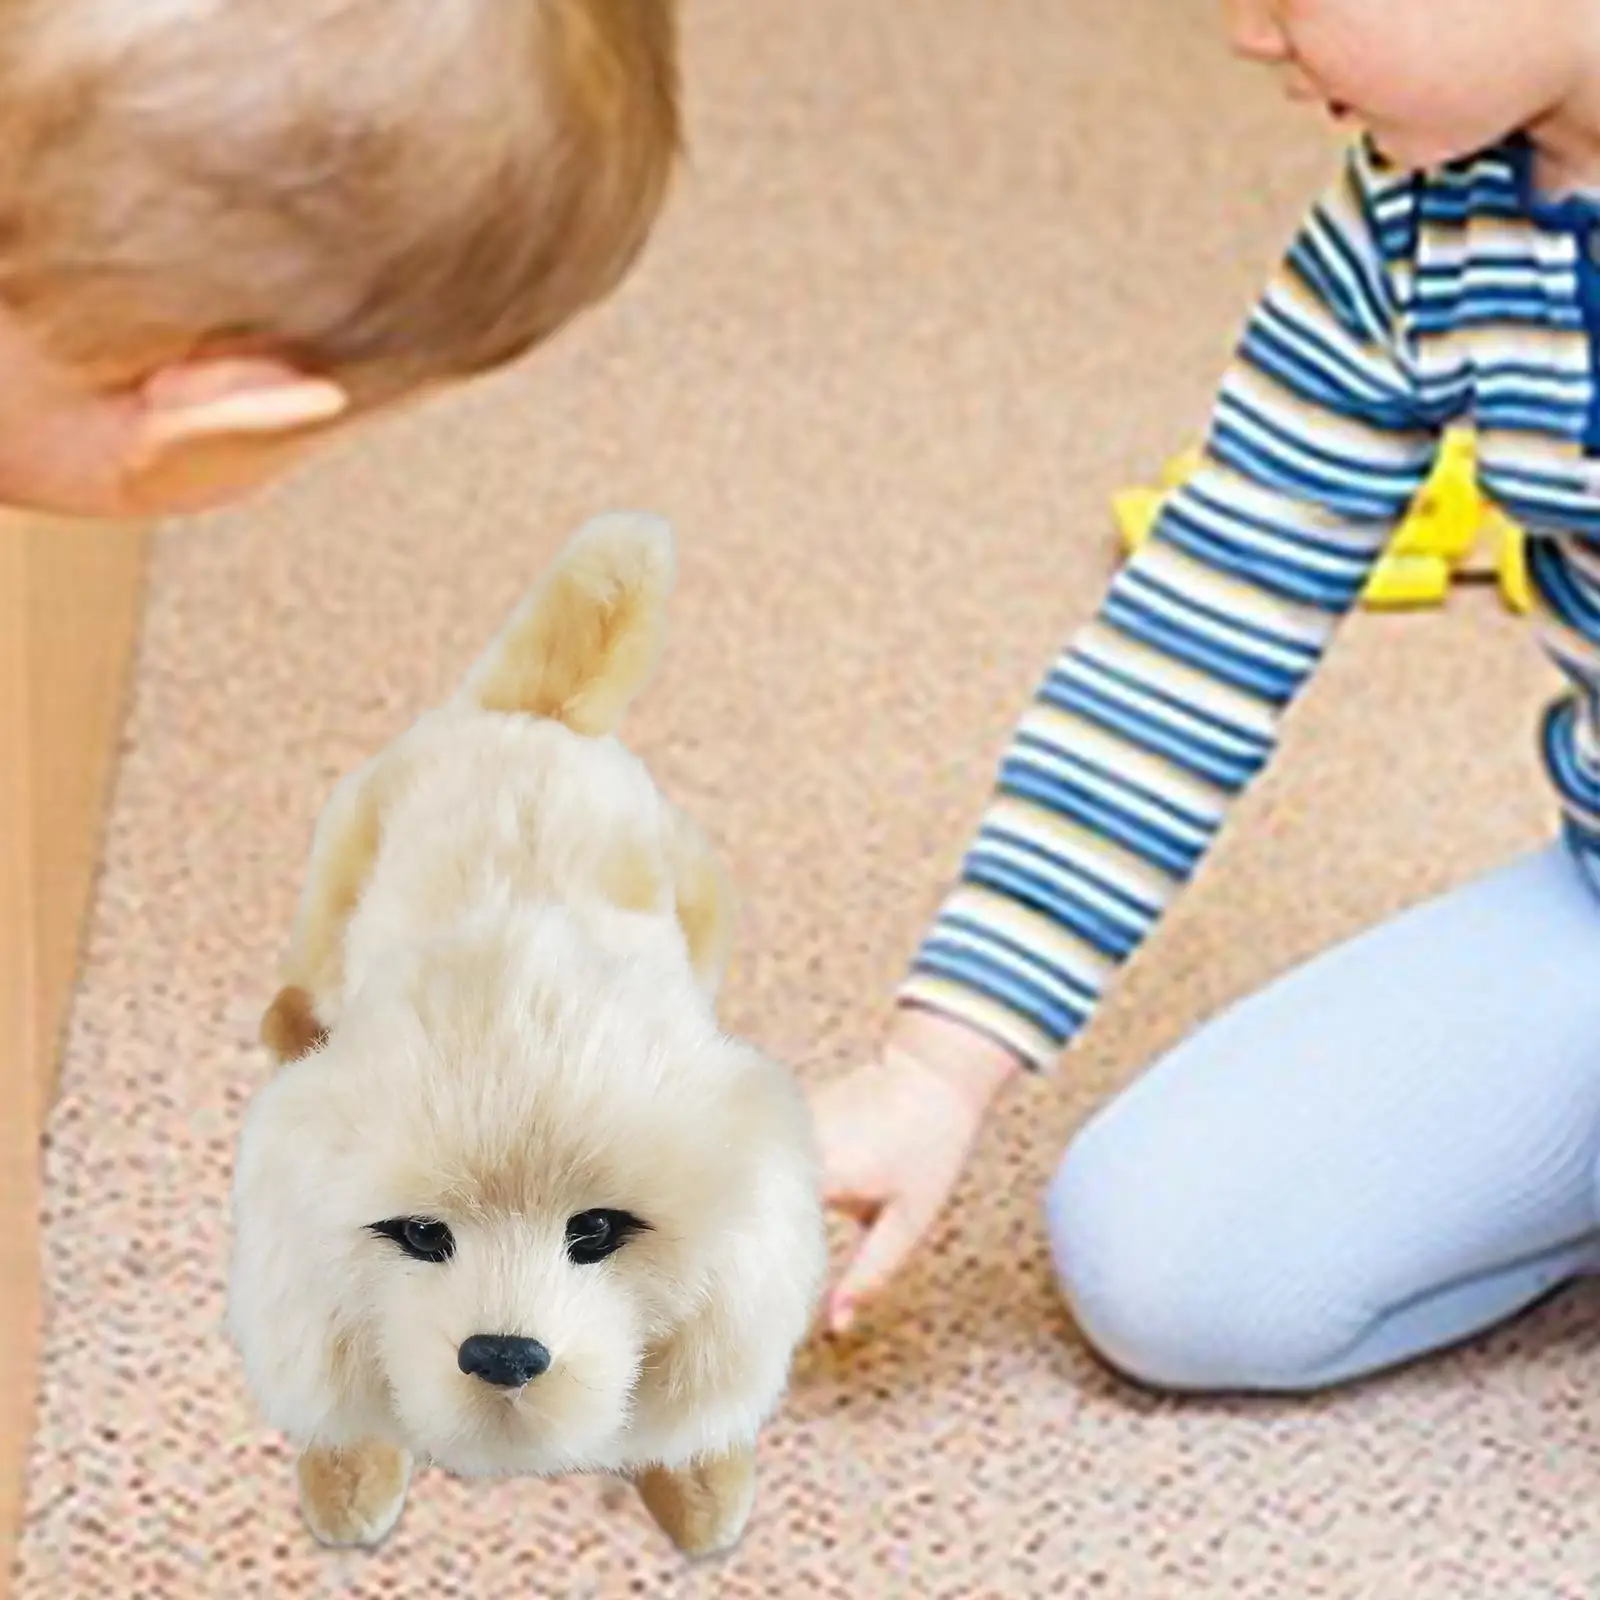 Simulated Electronic Pet Dog Battery Operated for New Year Children Kids